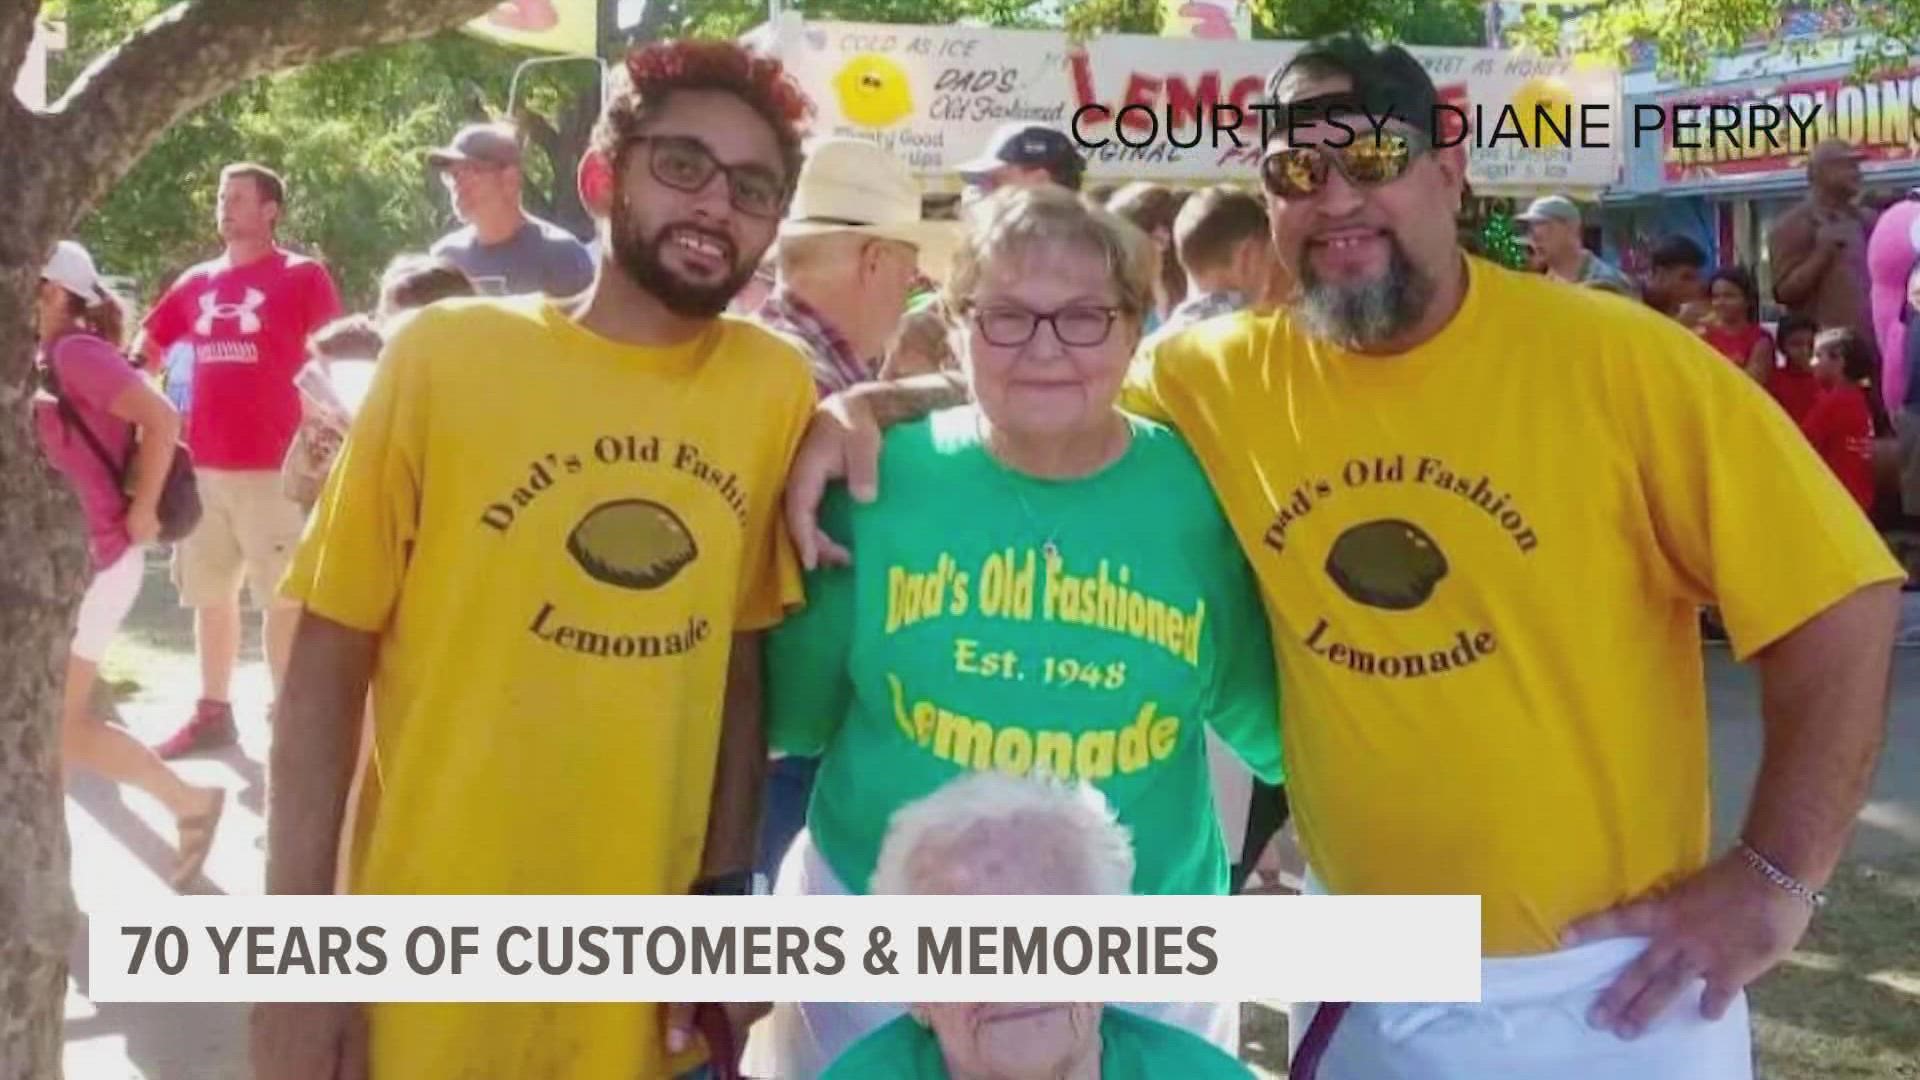 Dad's Old-Fashioned Lemonade has been at the state fair for more than 70 years.